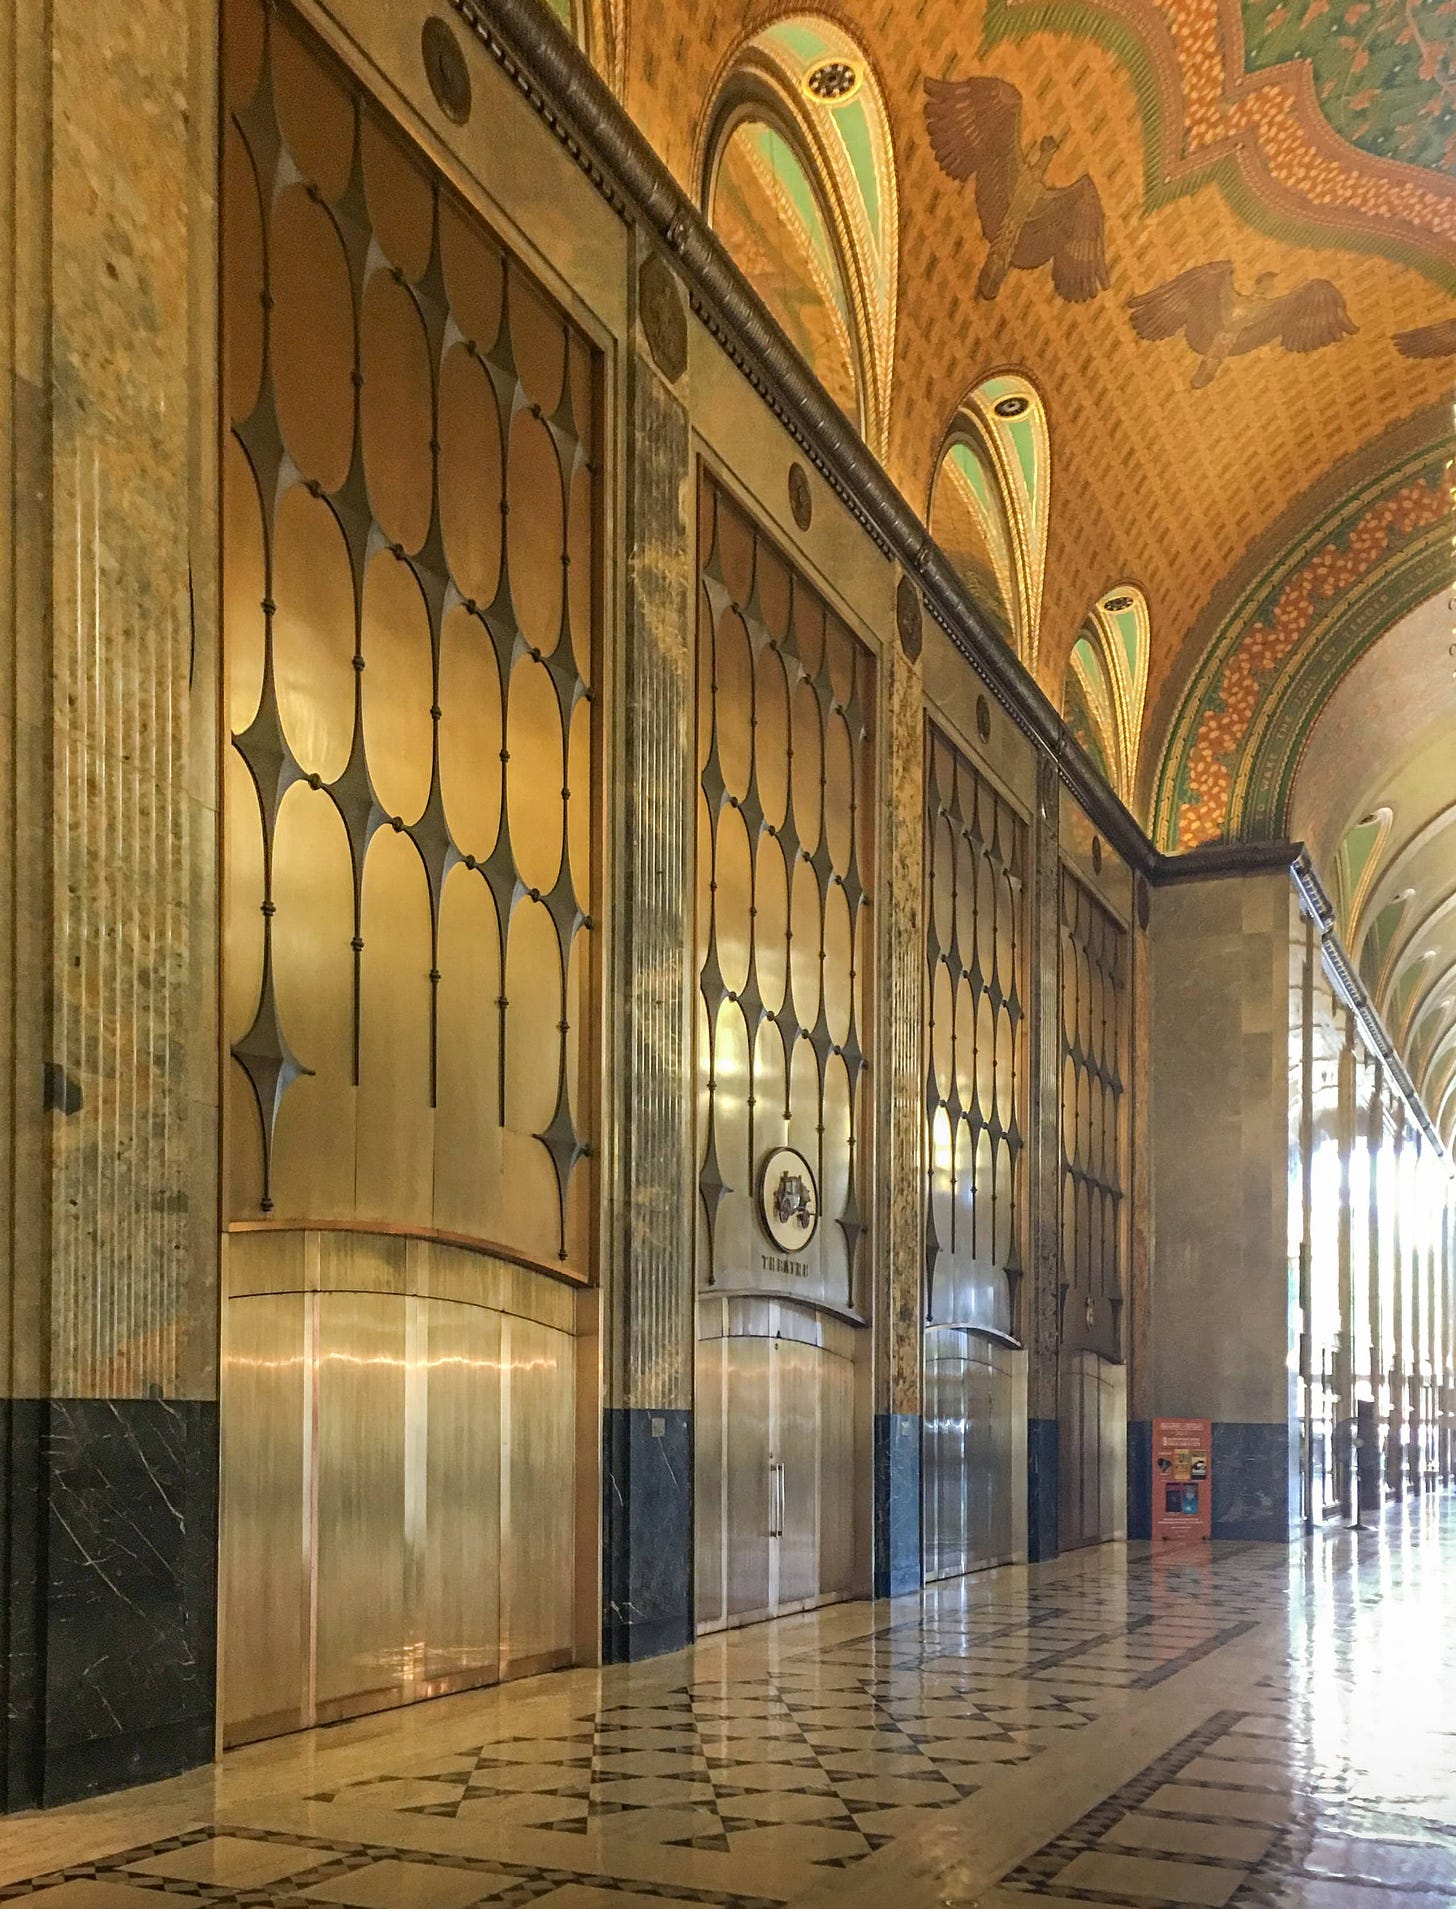 The interior of the Fisher Building in Detroit, Michigan.